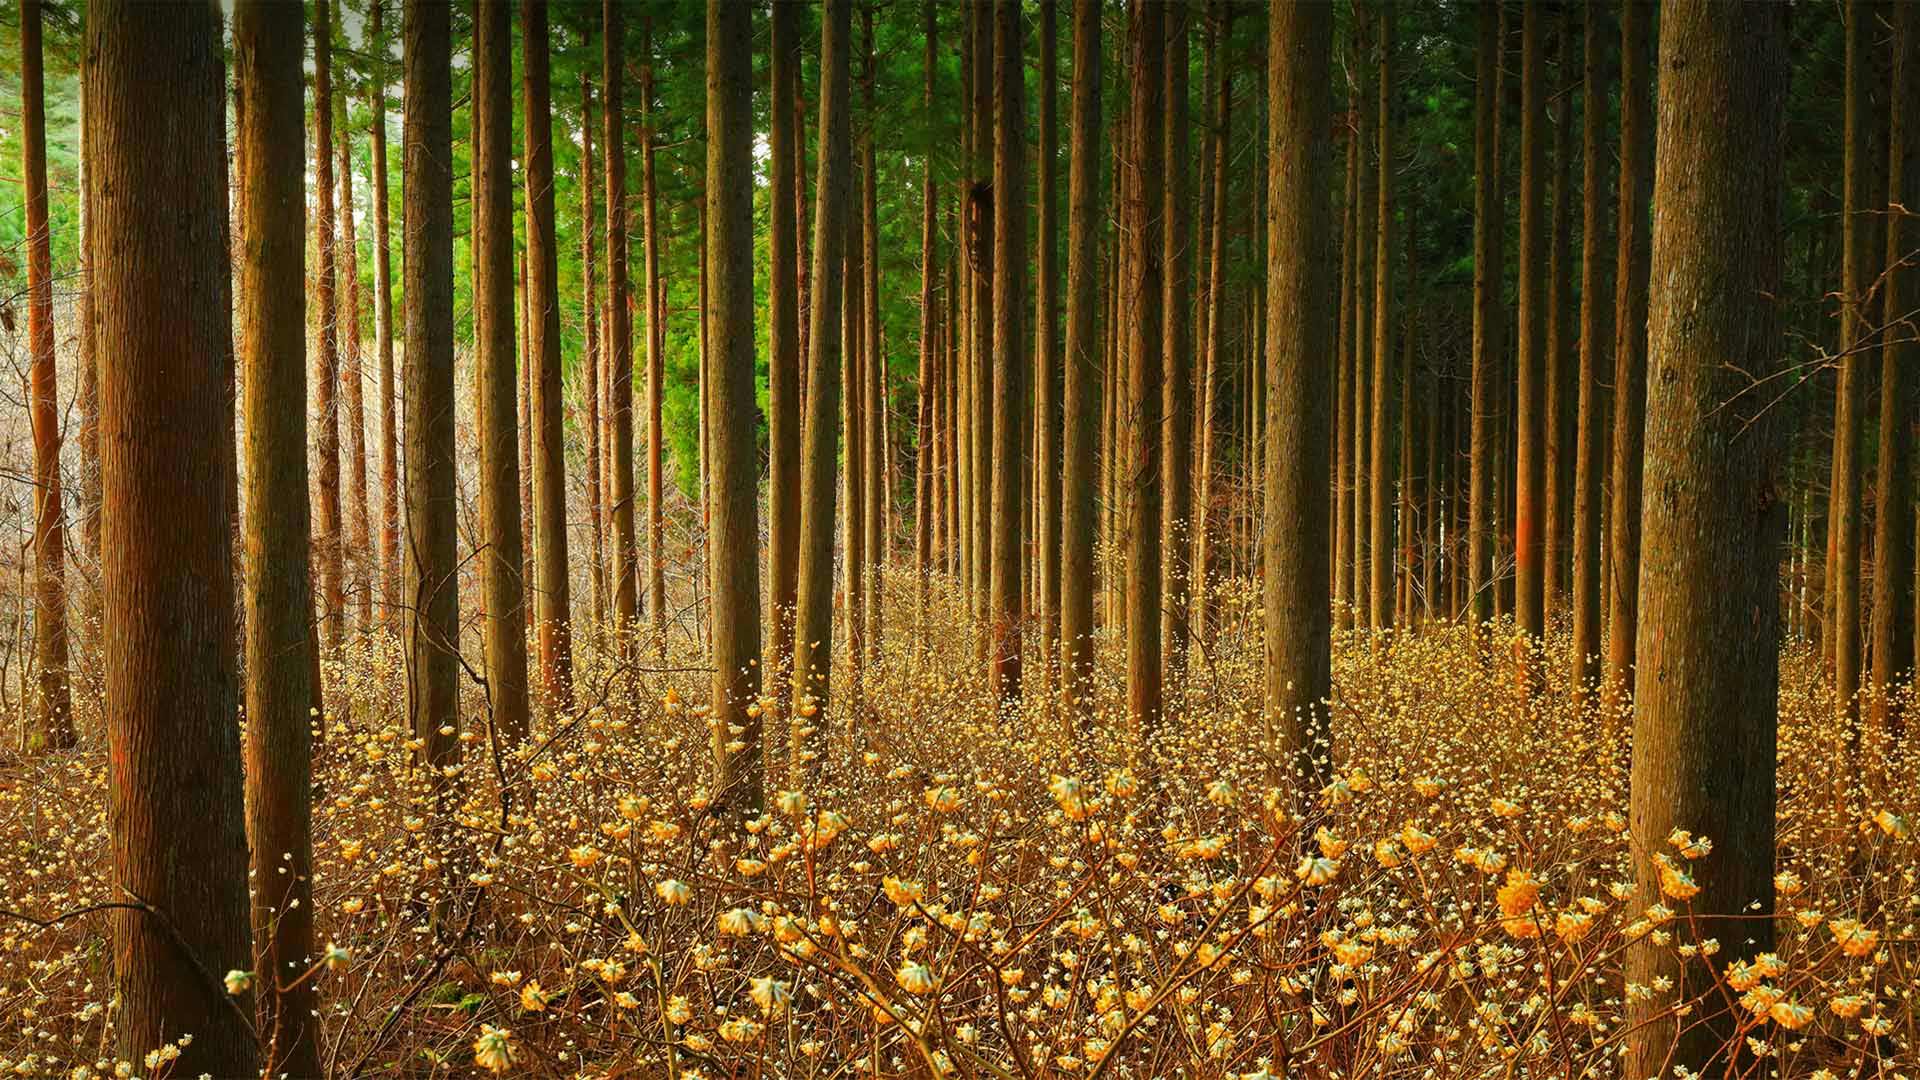 Mitsumata (aka paperbush) in a forest in Japan - nattya3714/Getty Images)